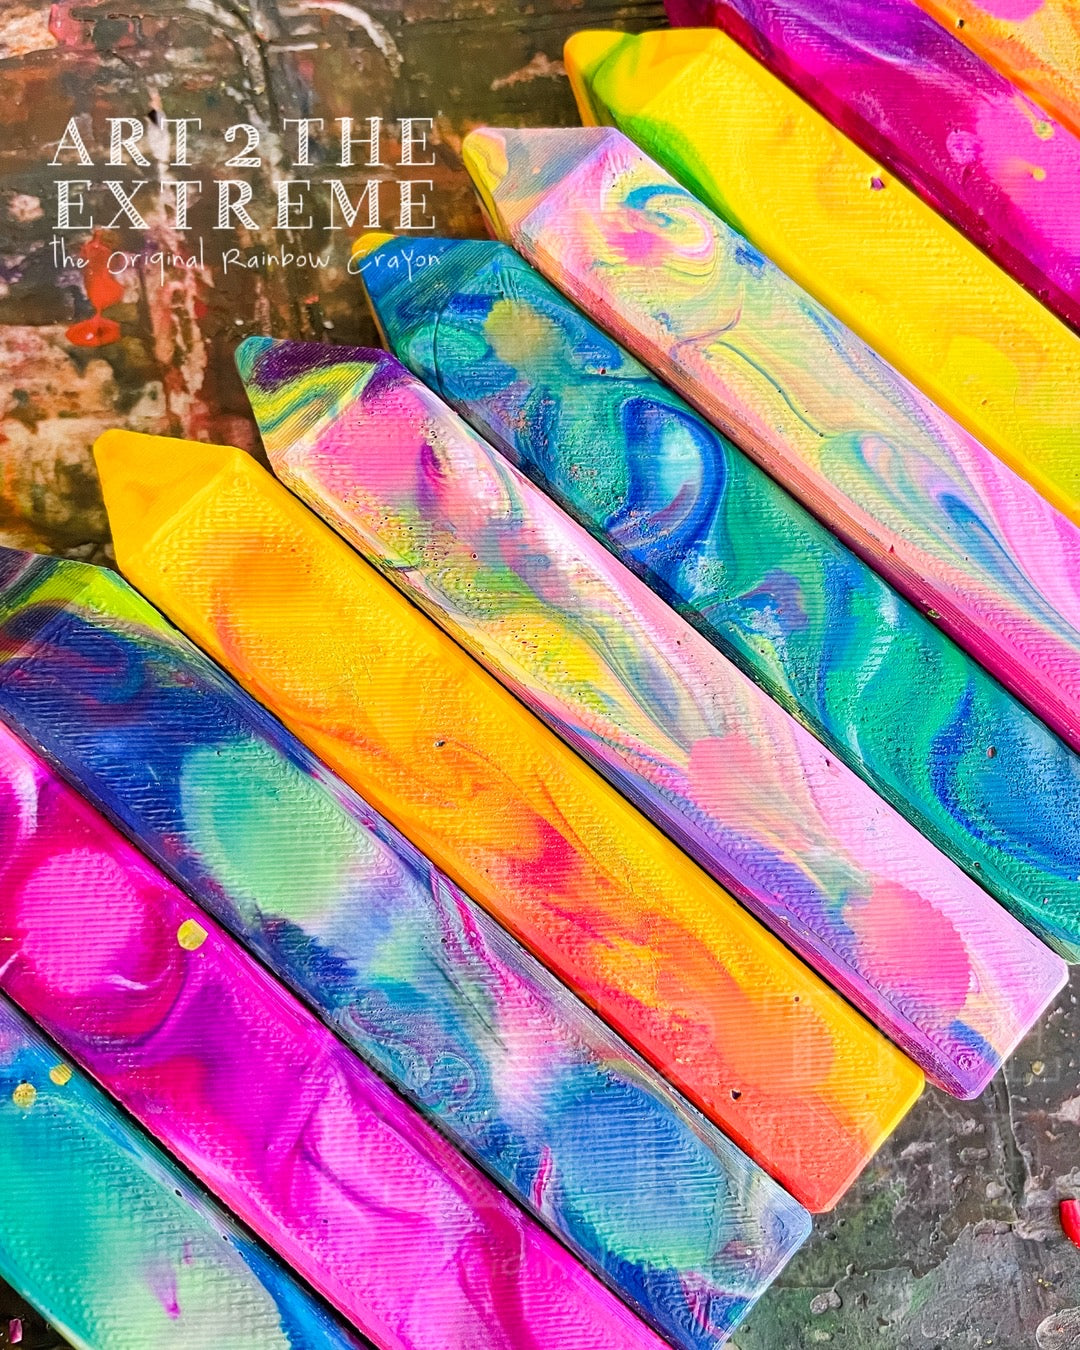 10 Individual Rainbow Crayon Stix that are multicolored, swirled crayons on a table.  Actual rainbow crayon gift product from Art 2 the Extreme will be shrink-wrapped in a pack of 4. 